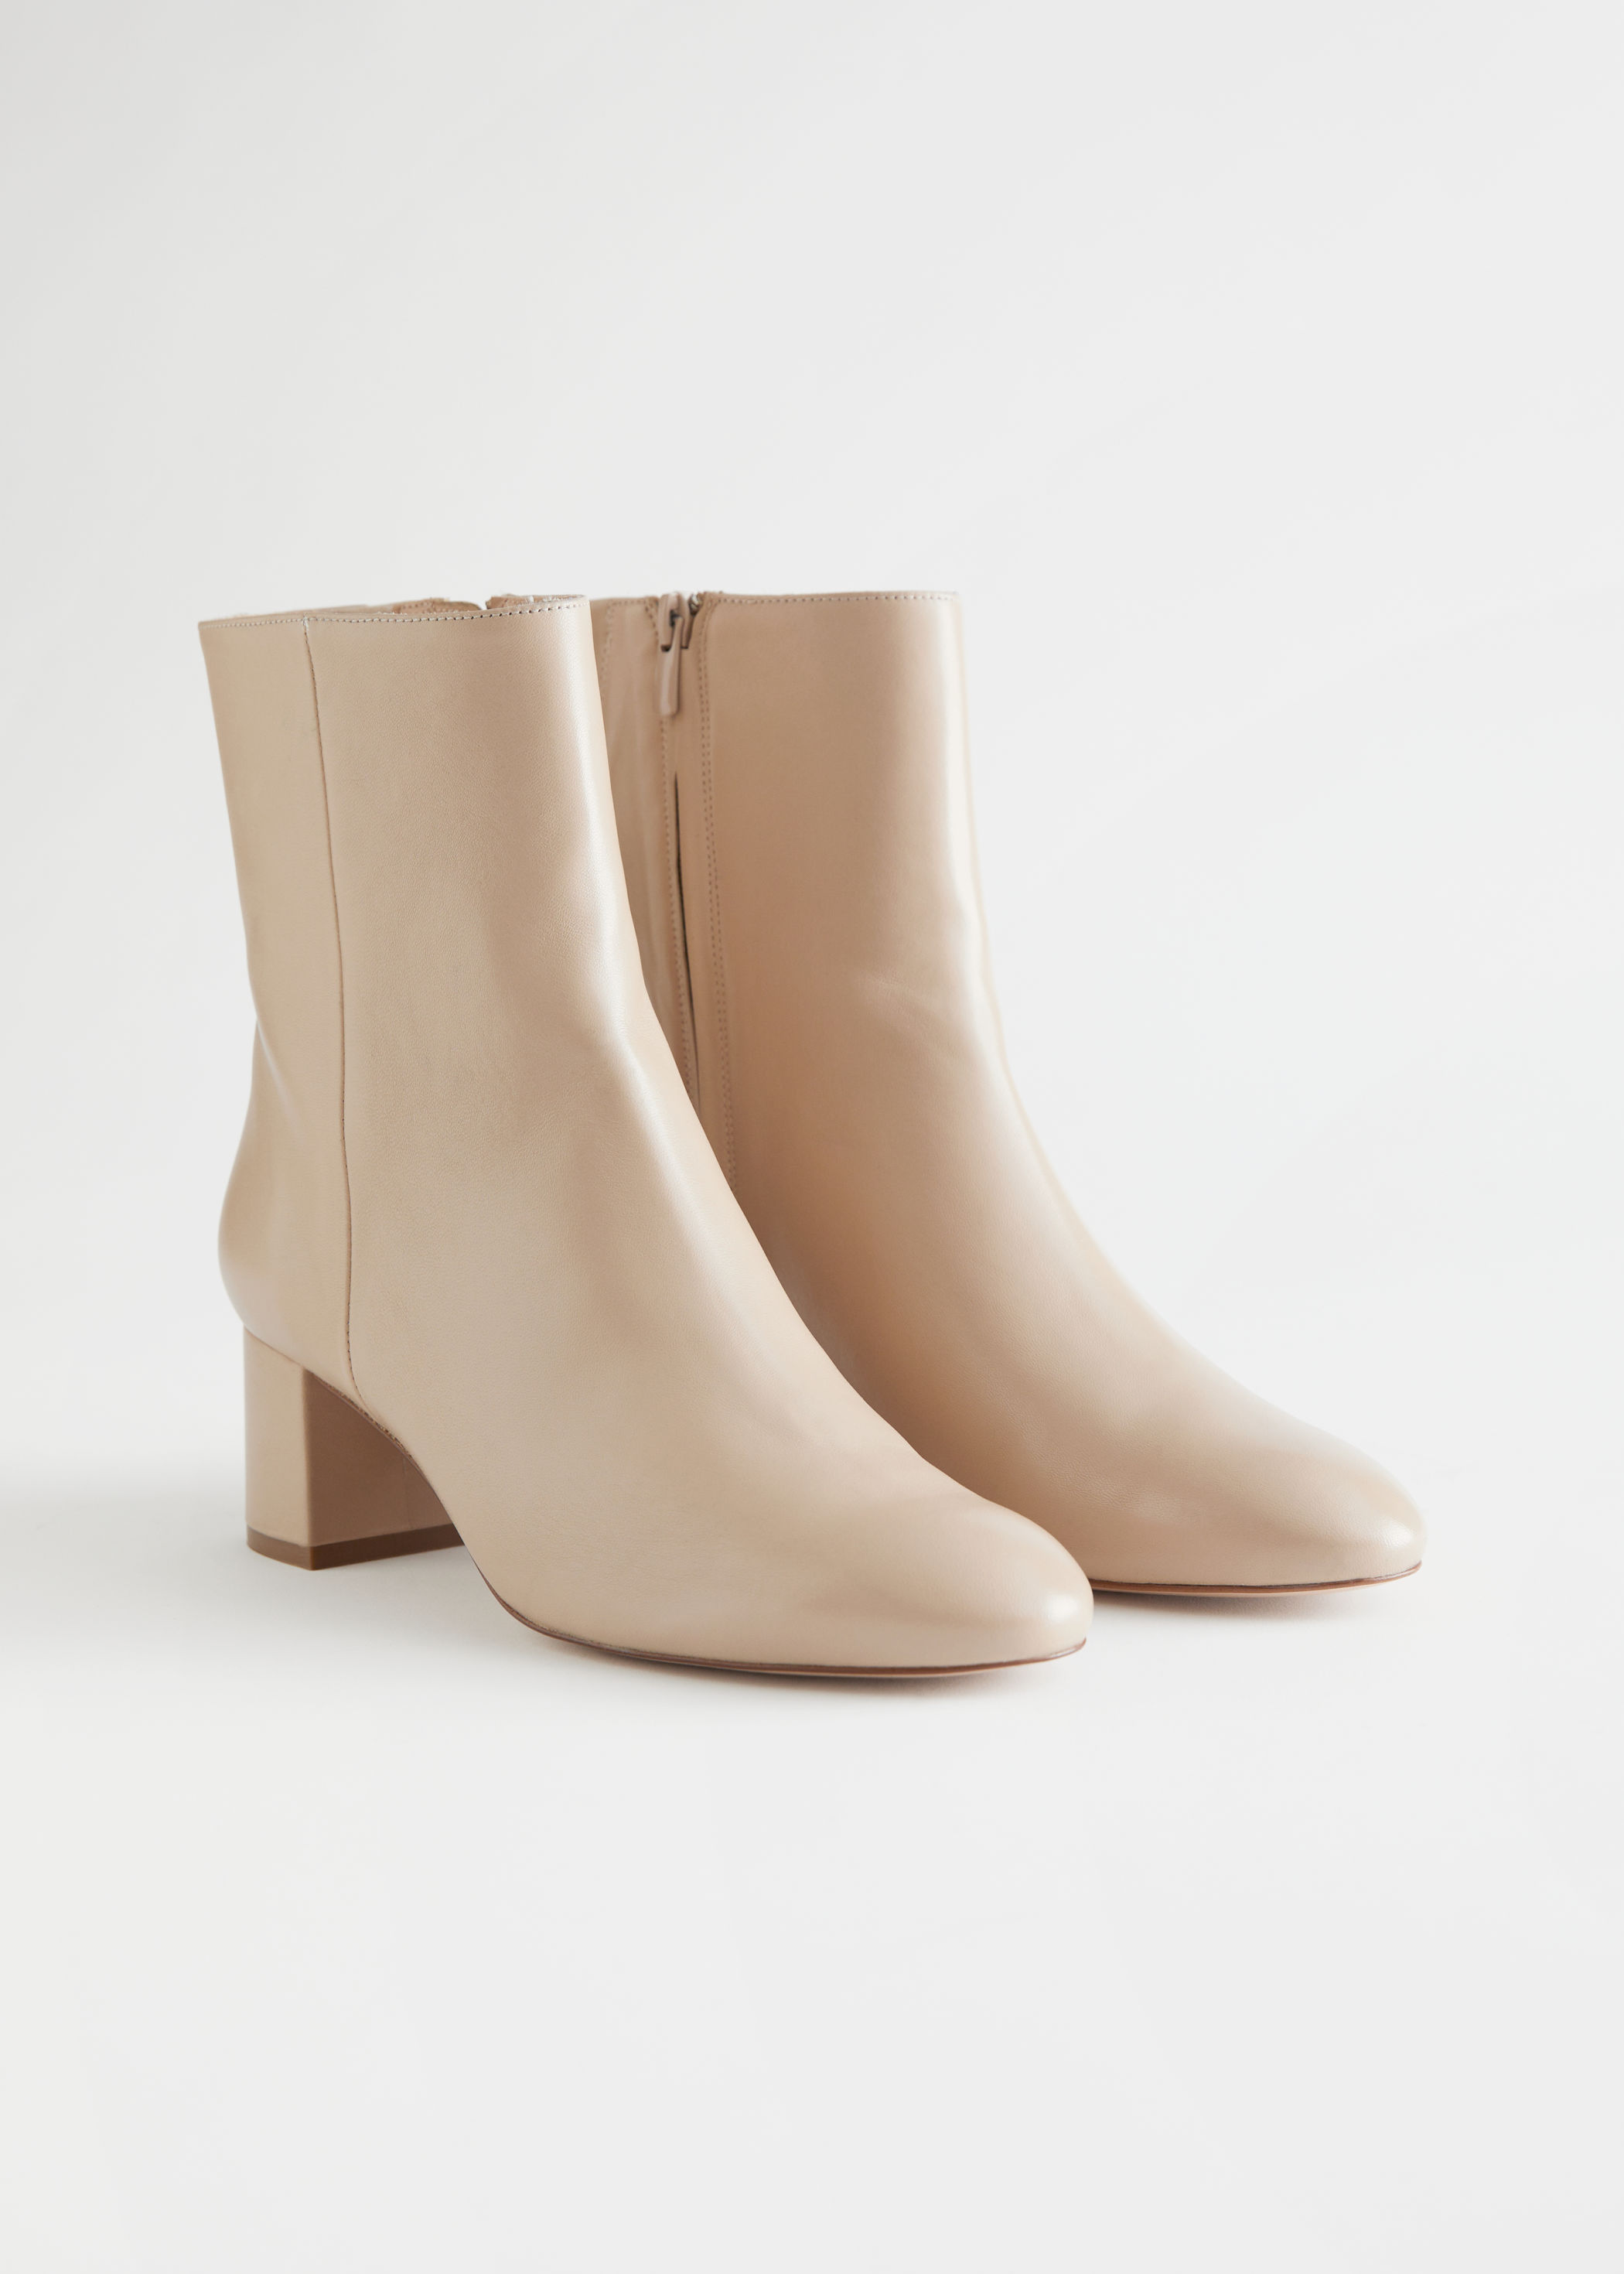 & Other Stories Almond Toe Heeled Leather Boots